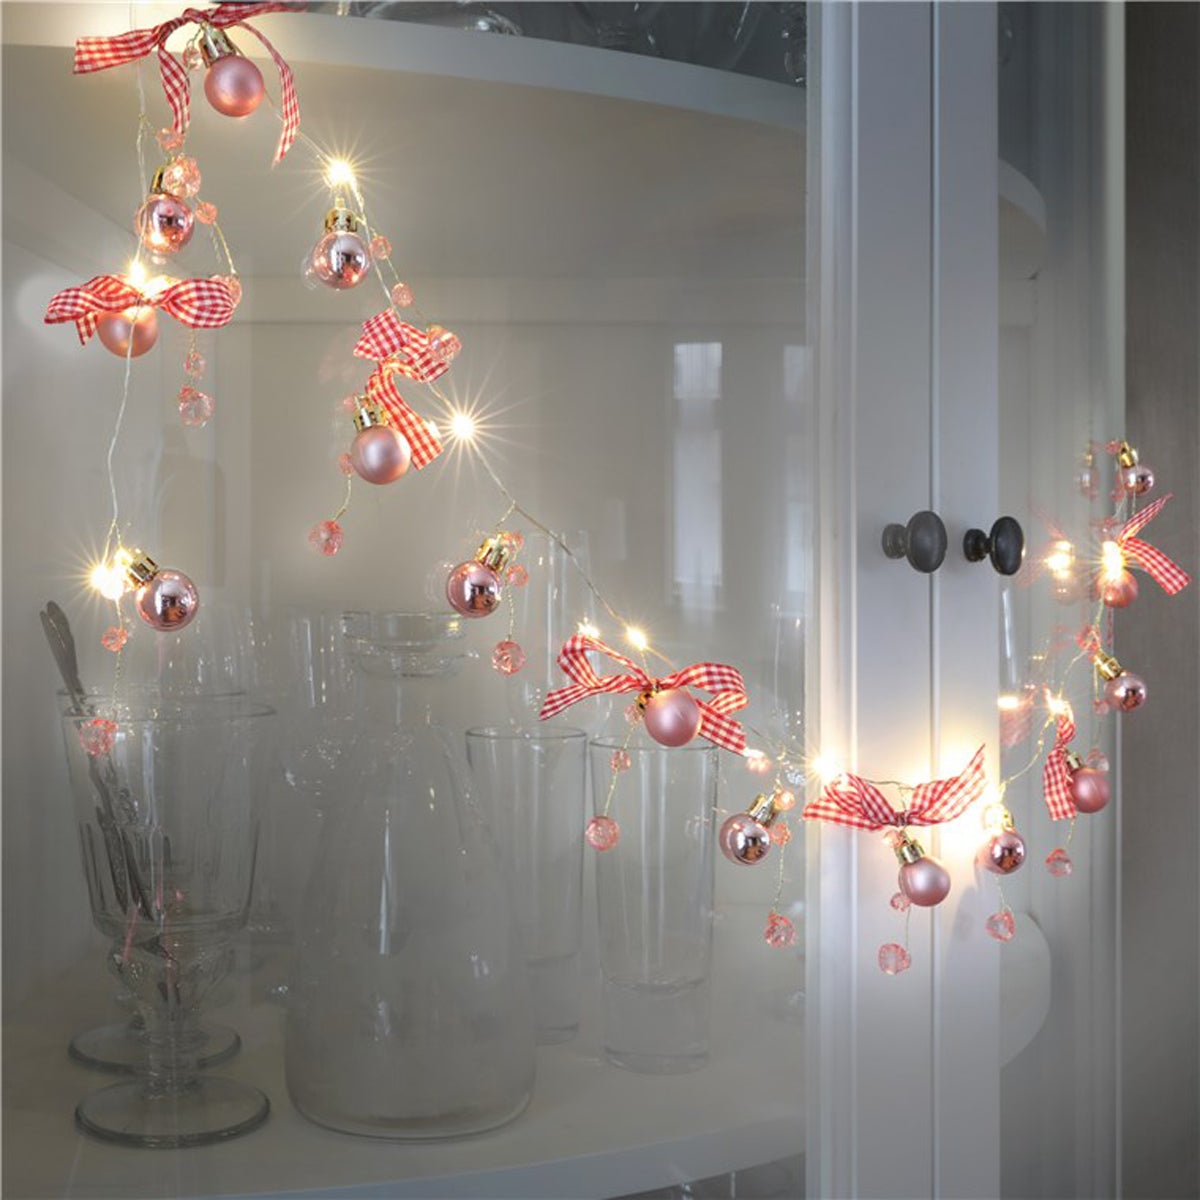 Goobay 10 LED Silver Wire Fairy Lights 1.2M - Balls/Ribbons.